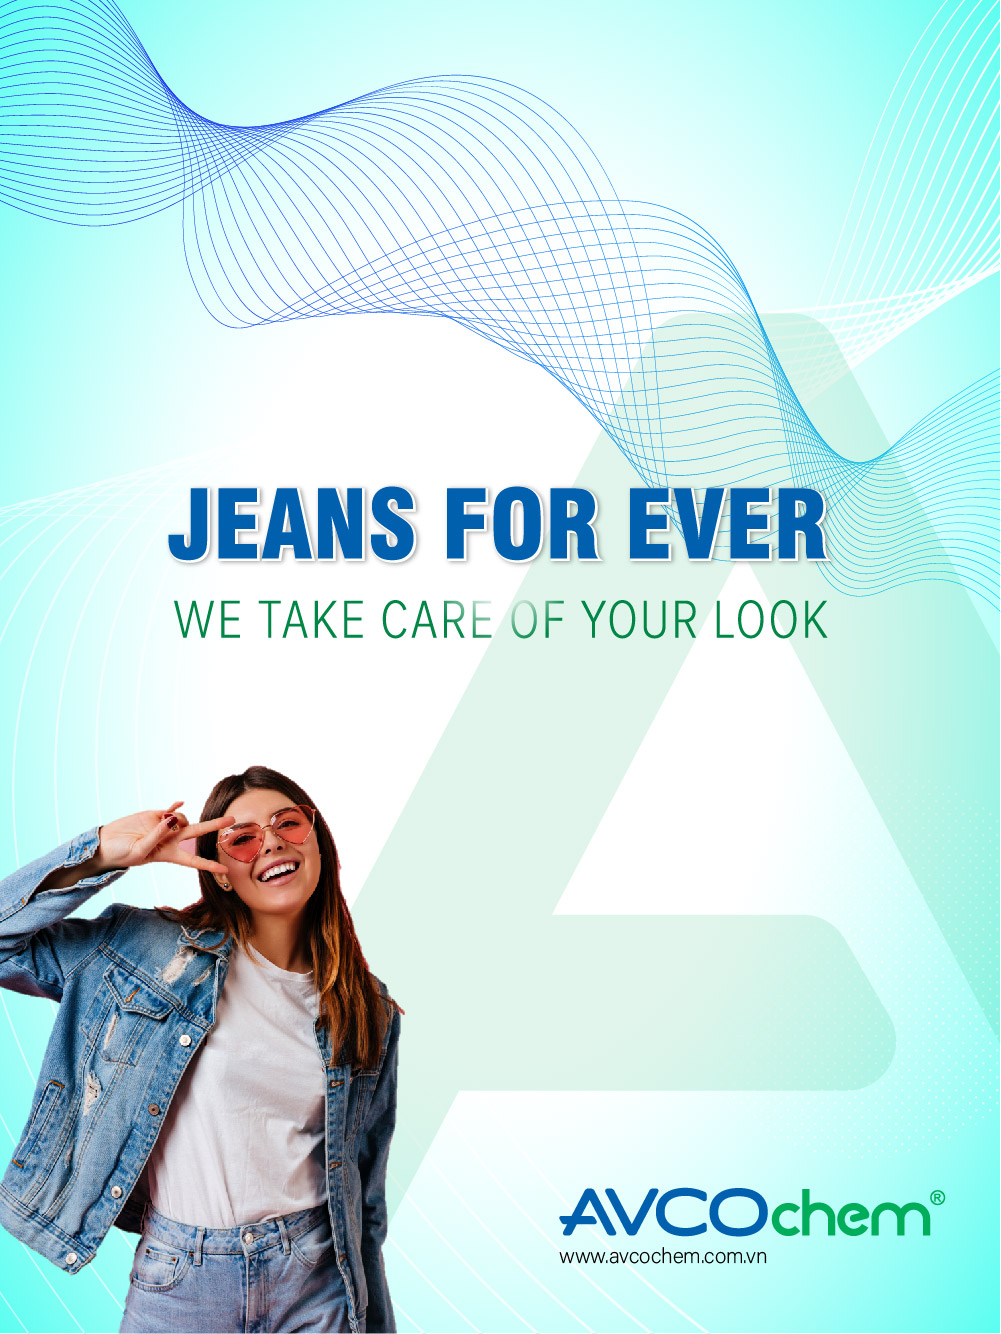 WE TAKE CARE OF YOUR LOOK